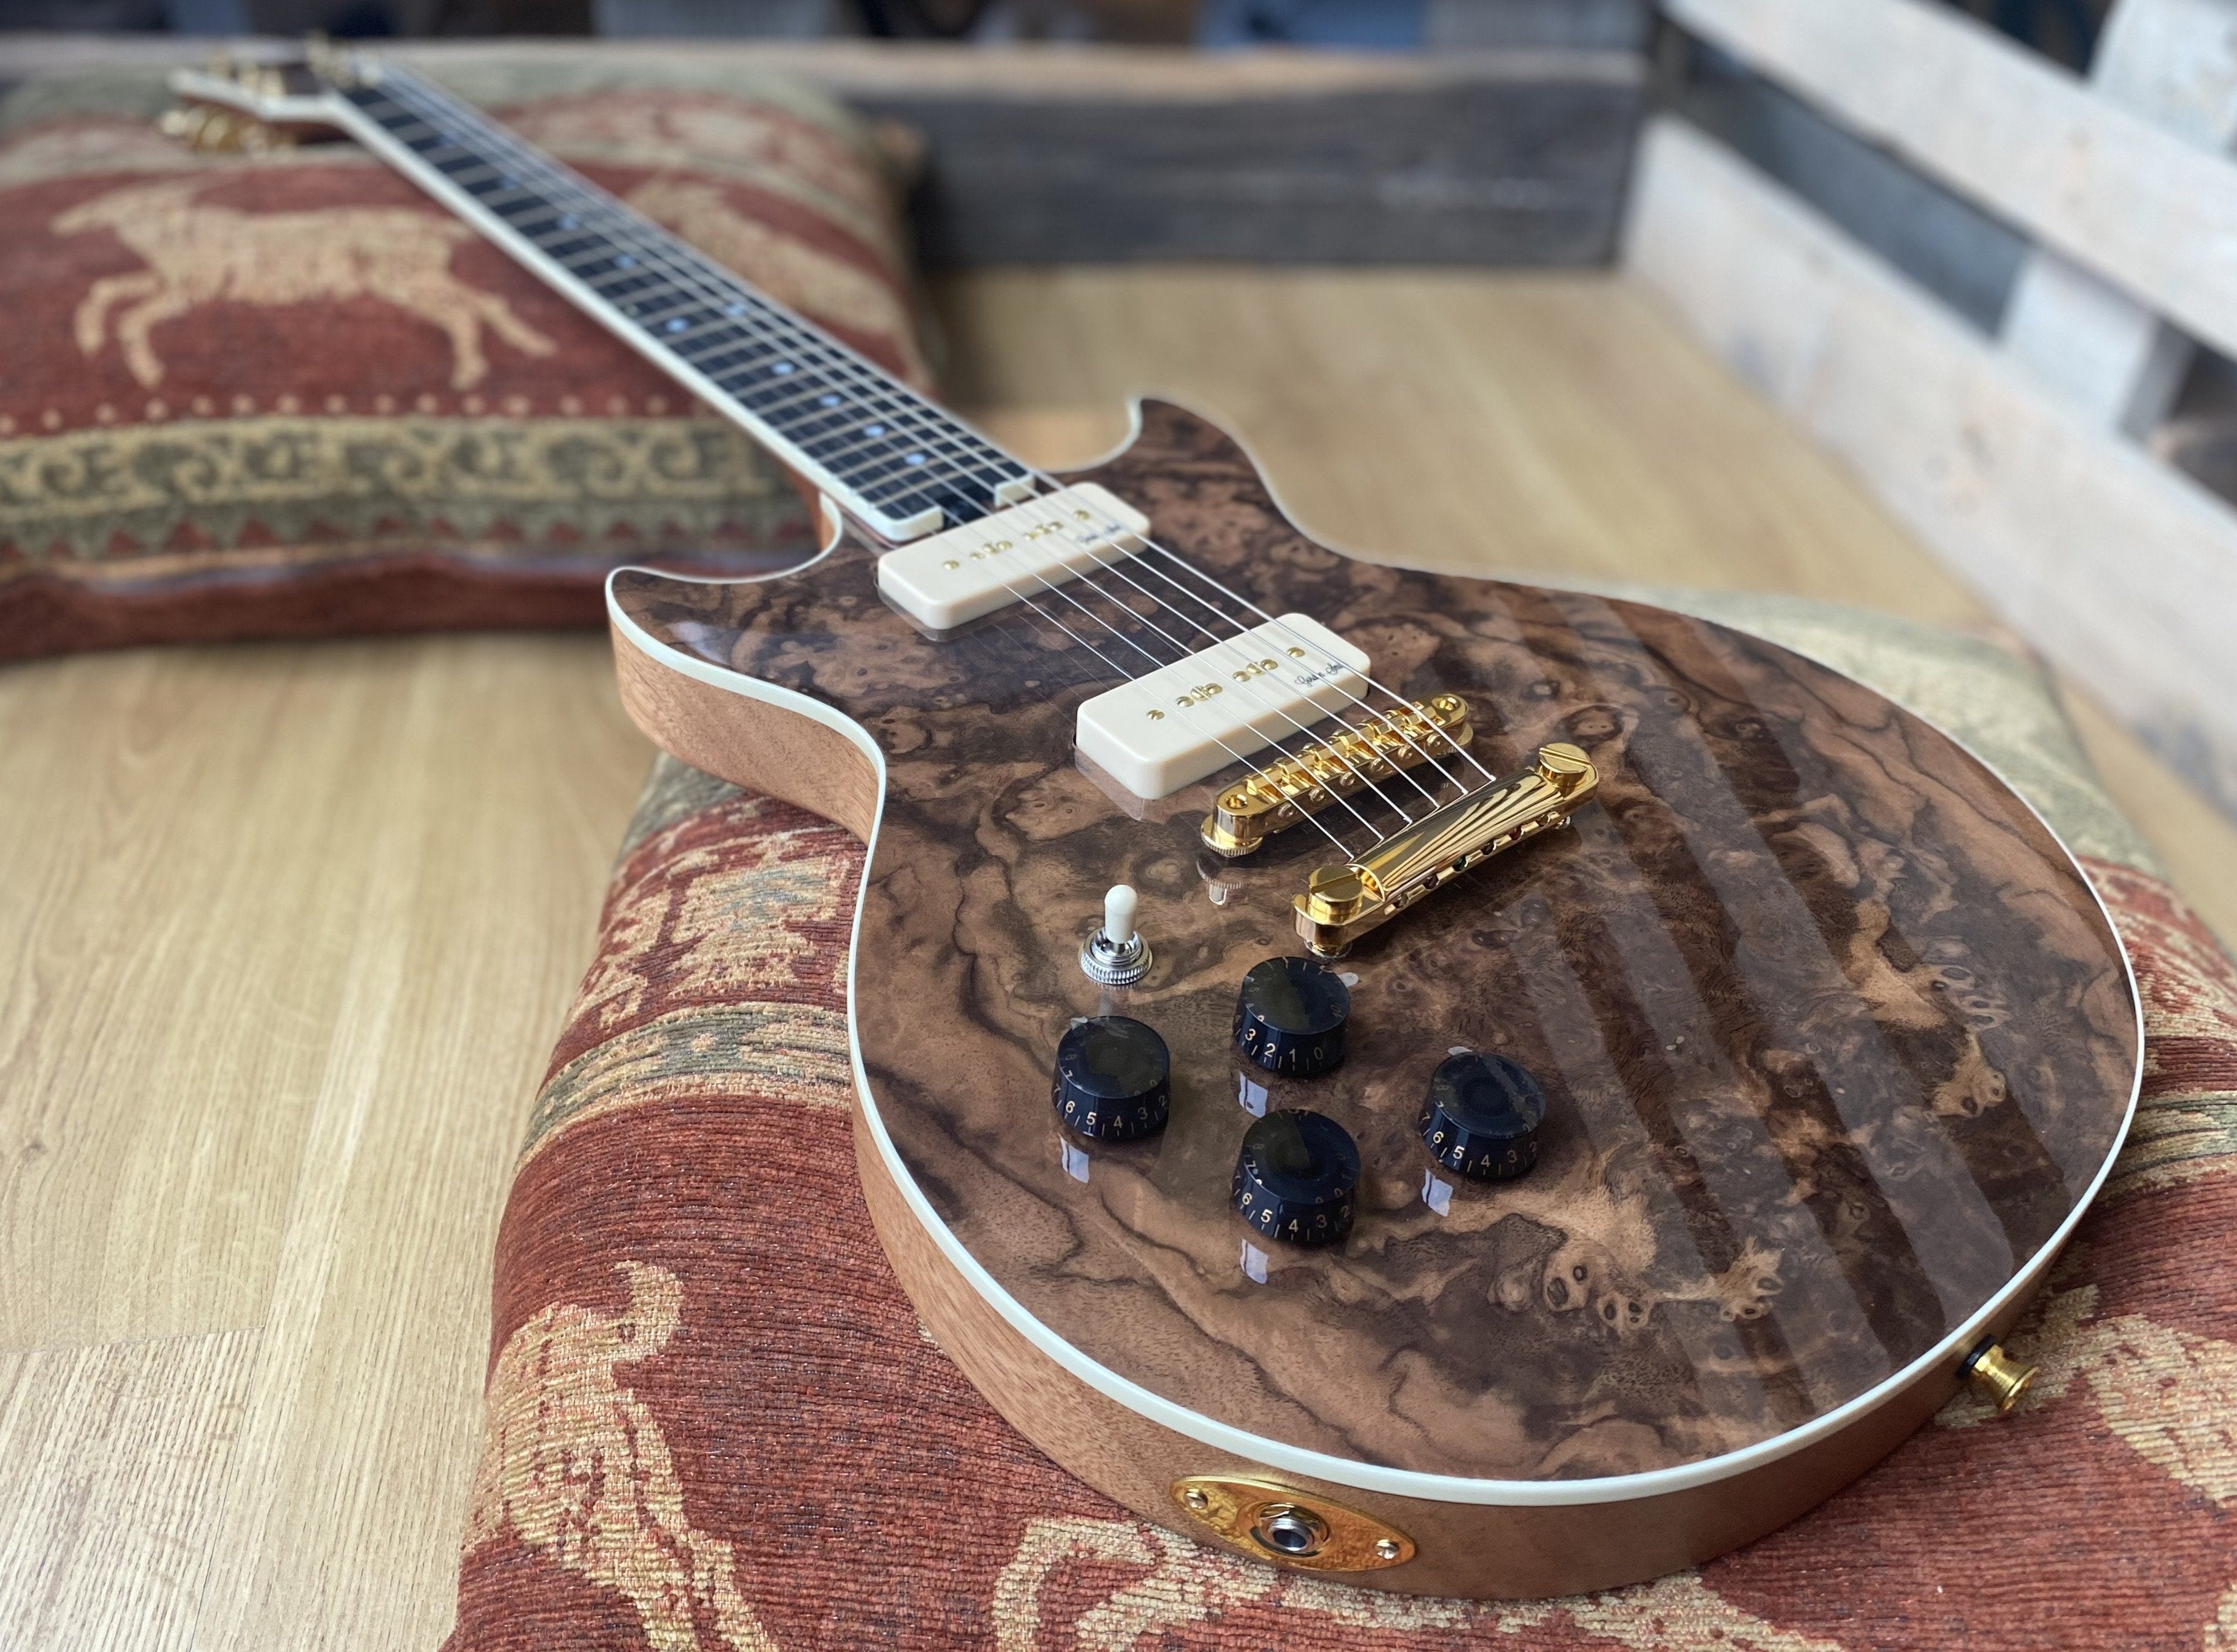 Gordon Smith GS Deluxe Burled Walnut P90 Custom Left Handed #20345, Electric Guitar for sale at Richards Guitars.